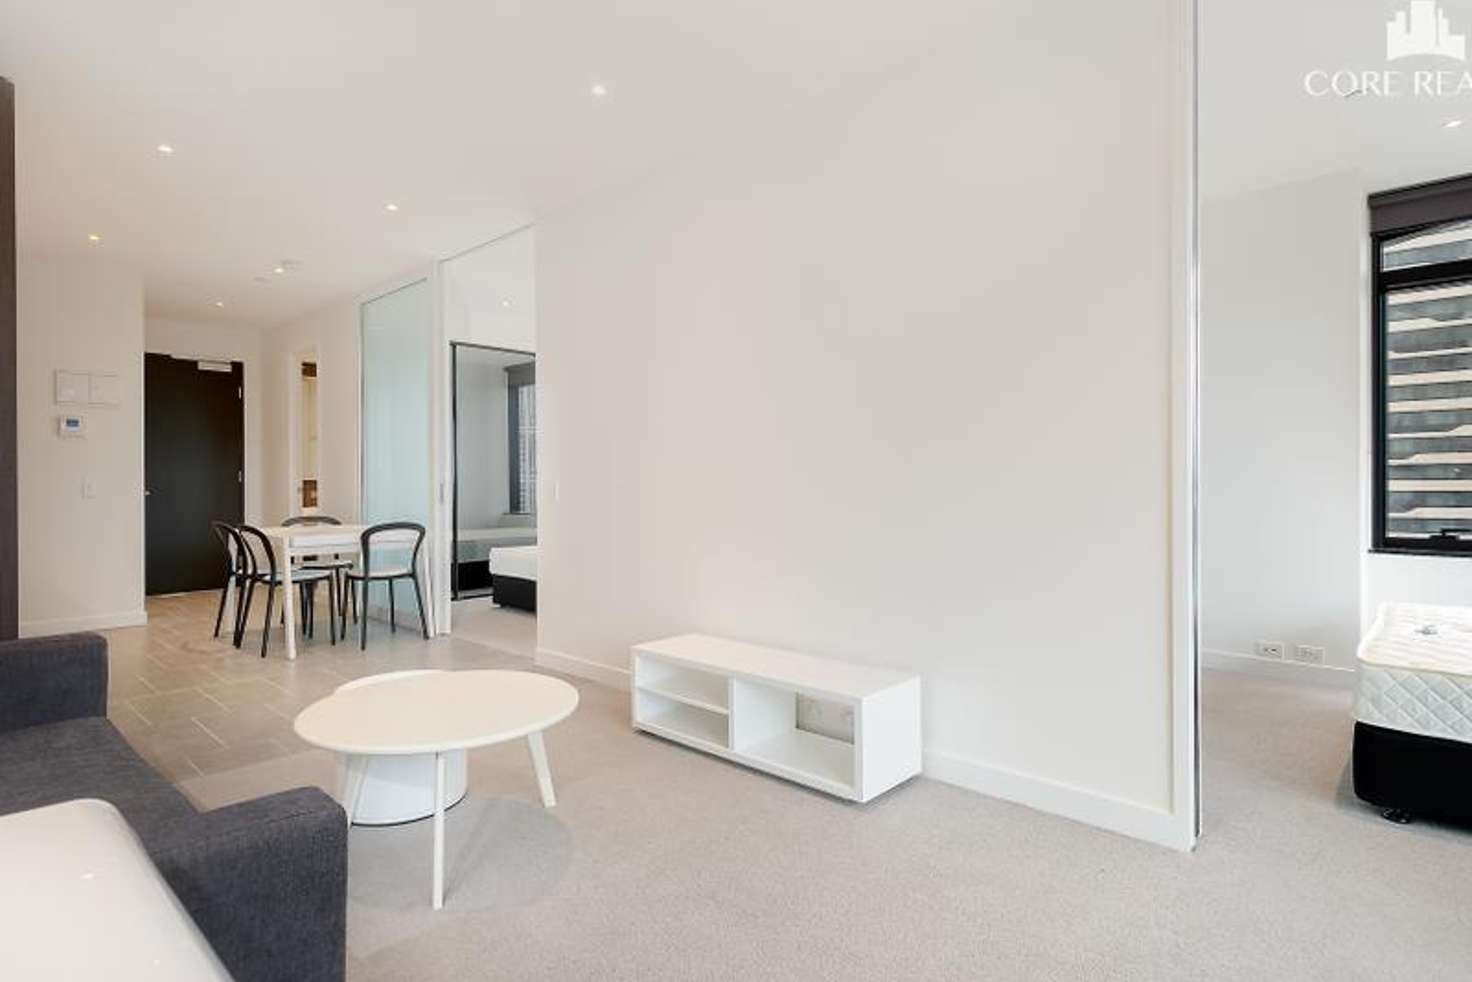 Main view of Homely apartment listing, 2609/120 Abeckett Street, Melbourne VIC 3000